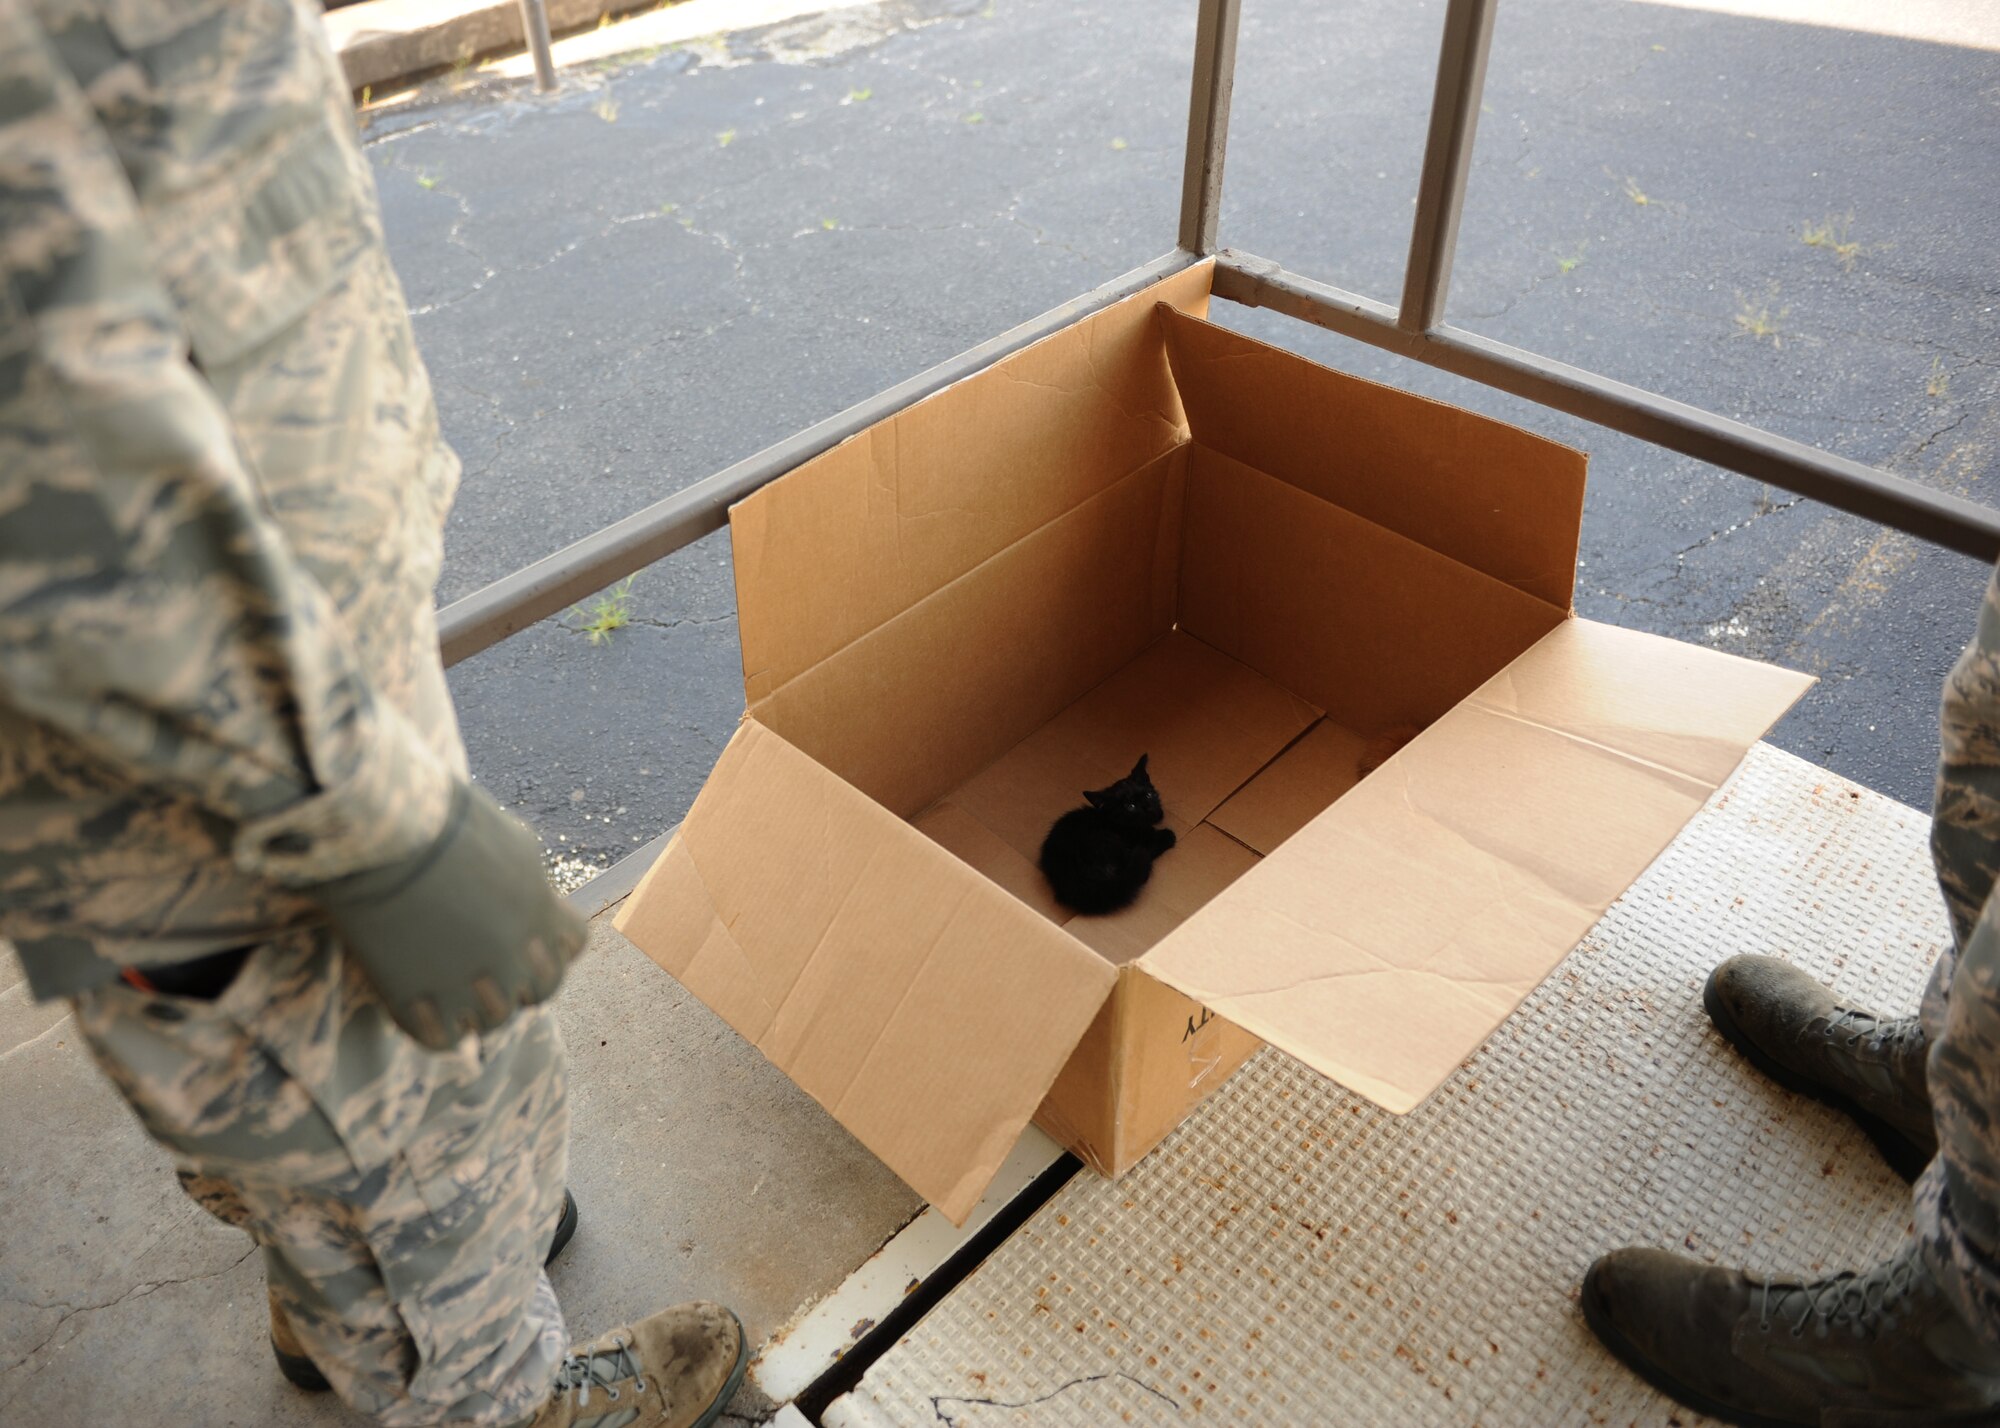 Airmen from the 19th Civil Engineer Squadron pest management flight, respond to a call involving kittens that were found by a dumpster June 24, 2014, at Little Rock Air Force Base, Ark. The kittens were adopted by an Airman shortly after being rescued. (U.S. Air Force photo by Airman 1st Class Scott Poe)   